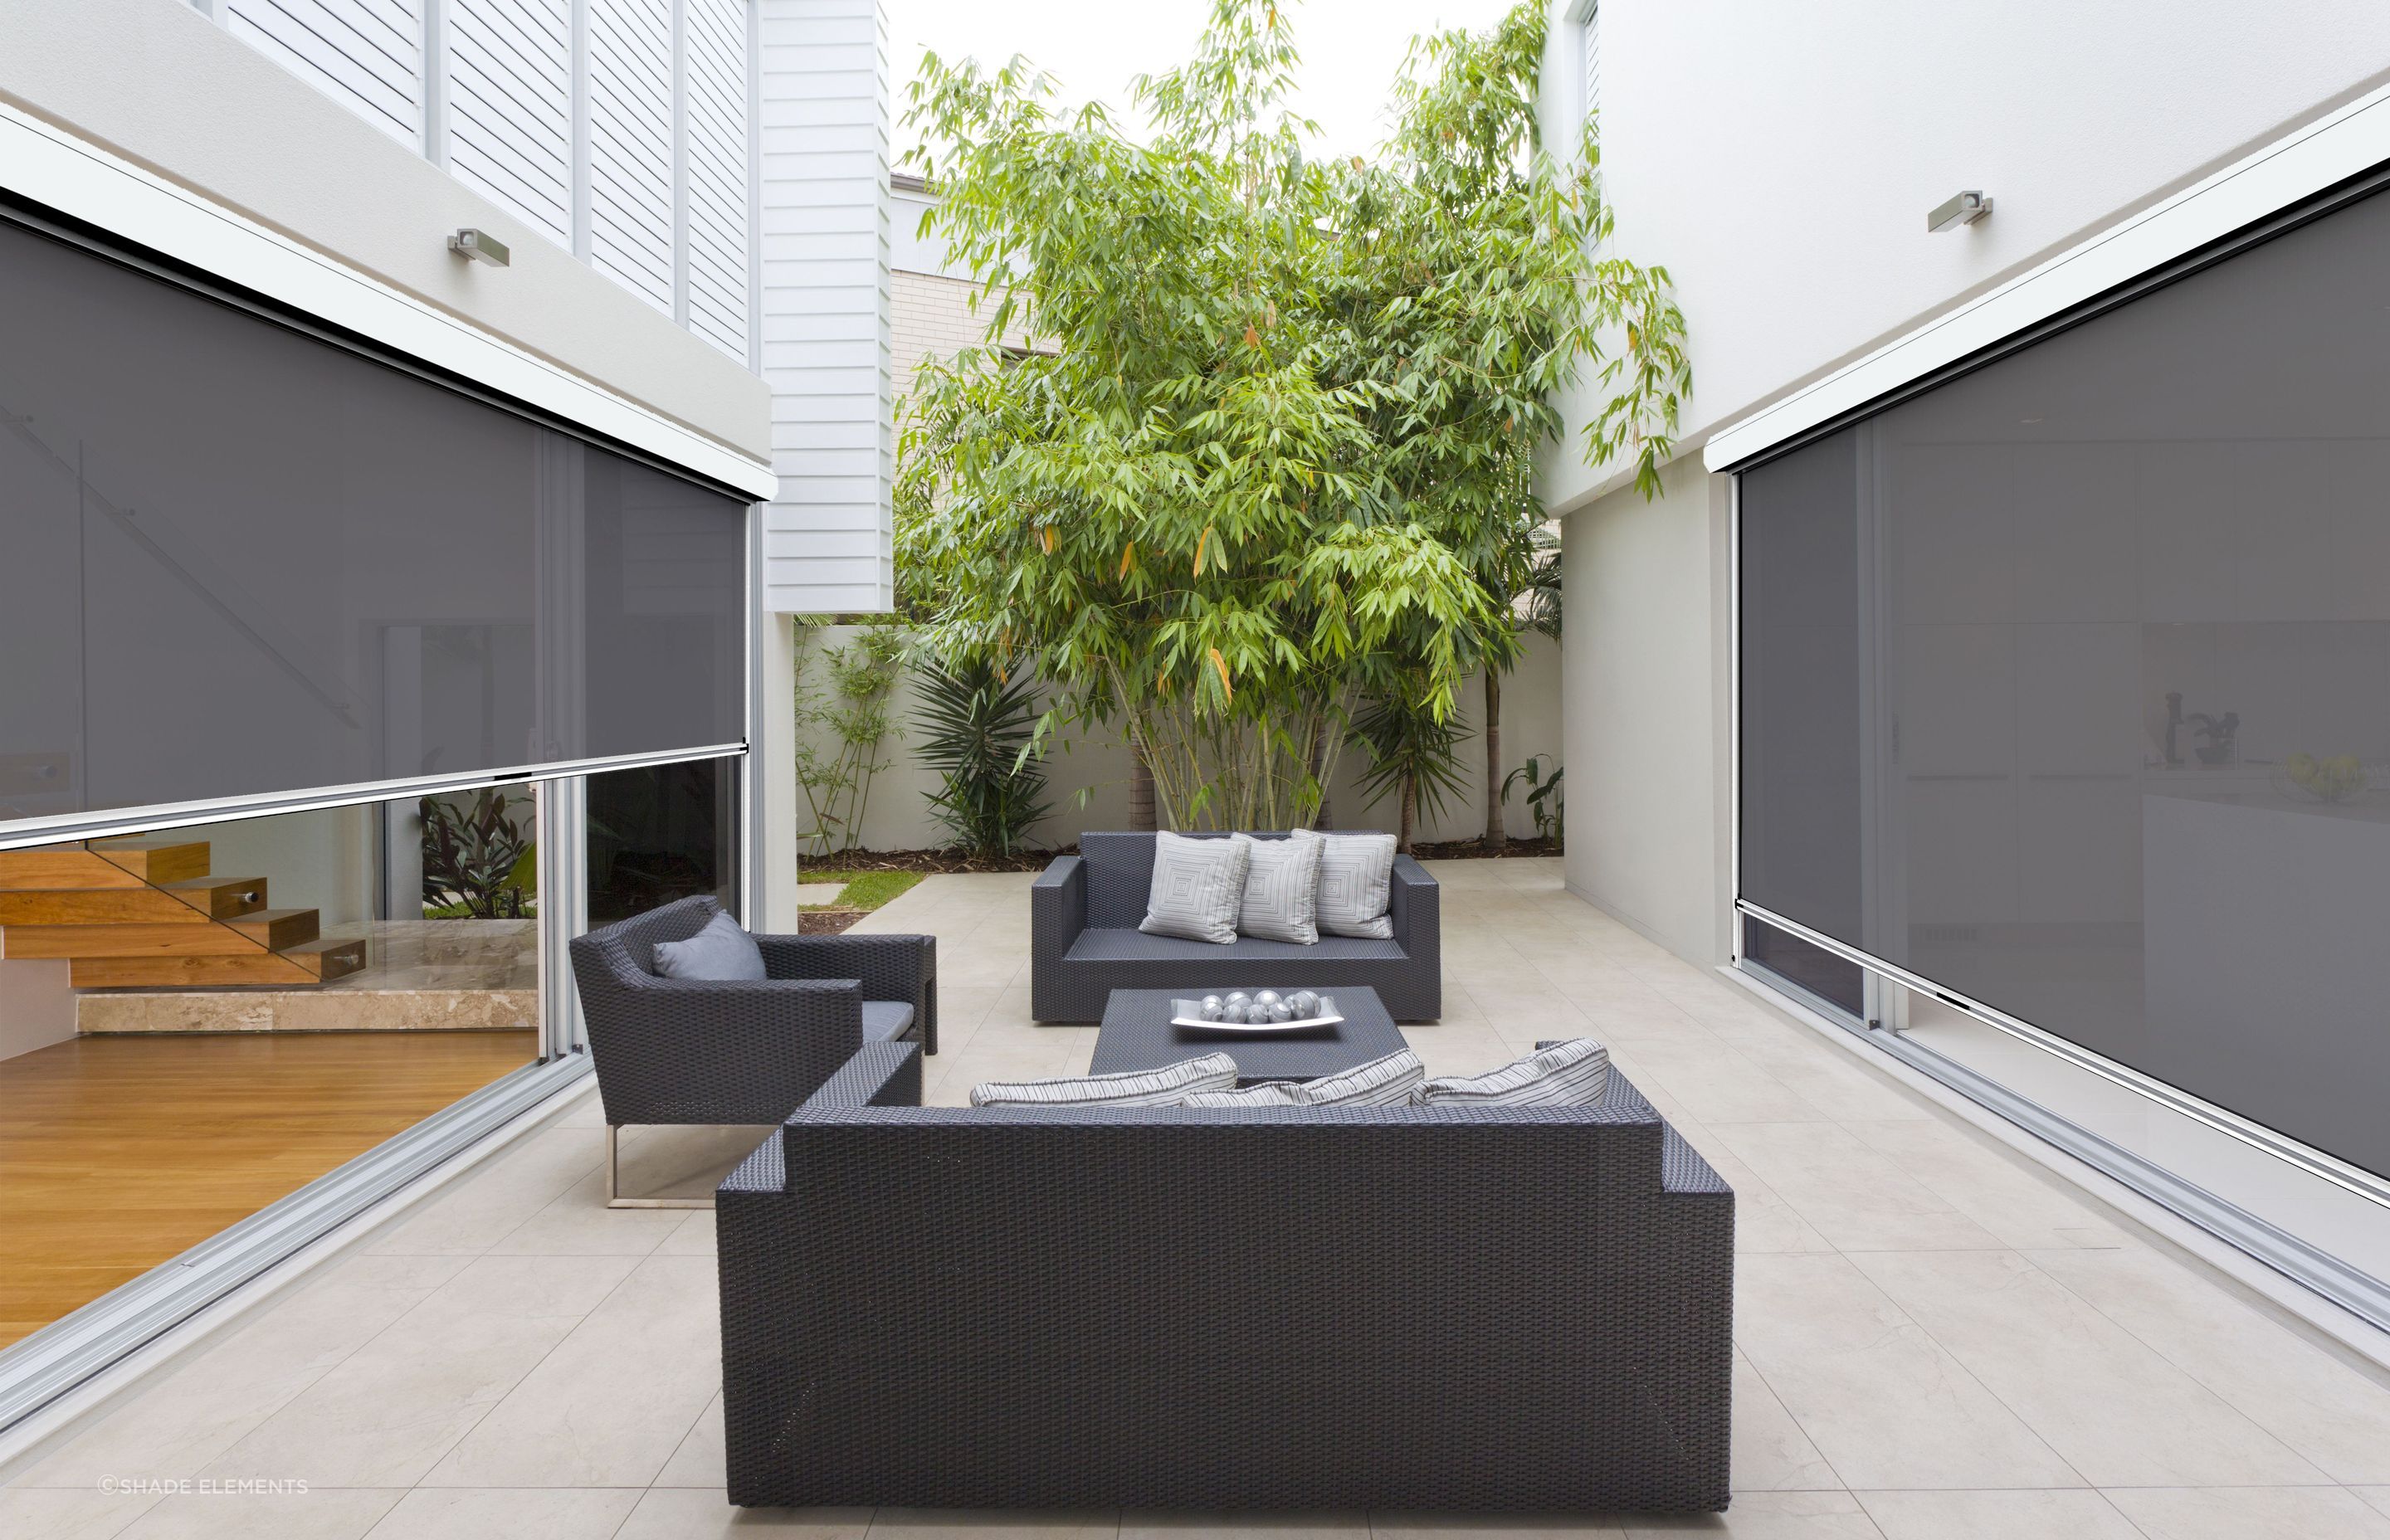 The incredibly popular solutions by Ziptrak, showcased here by Shade Elements, never fail to enhance an outdoor living area.